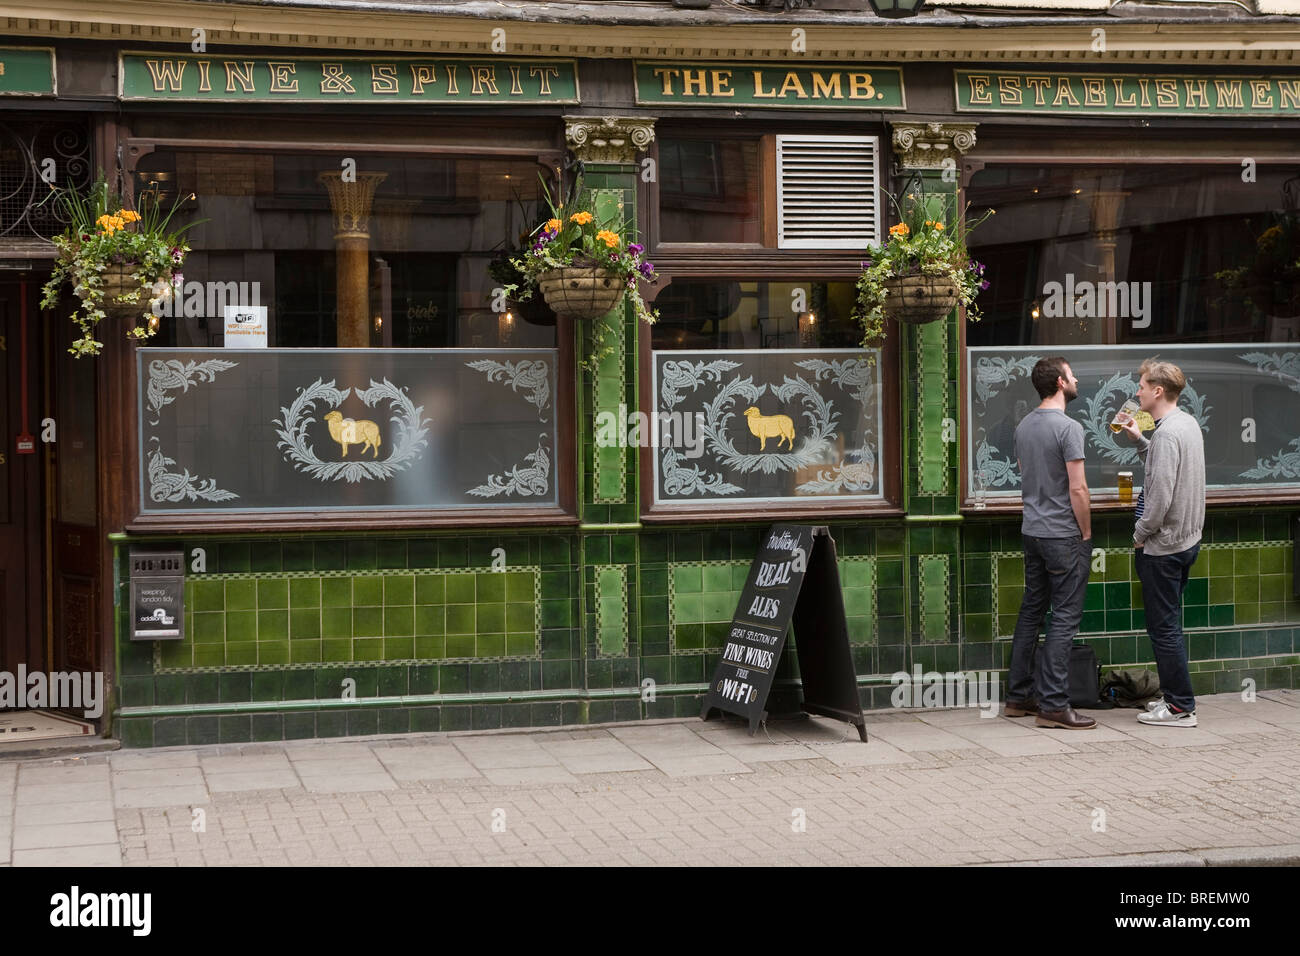 The Lamb a traditional pub in central London run byYoungs Britain's well known real ale brewer Stock Photo